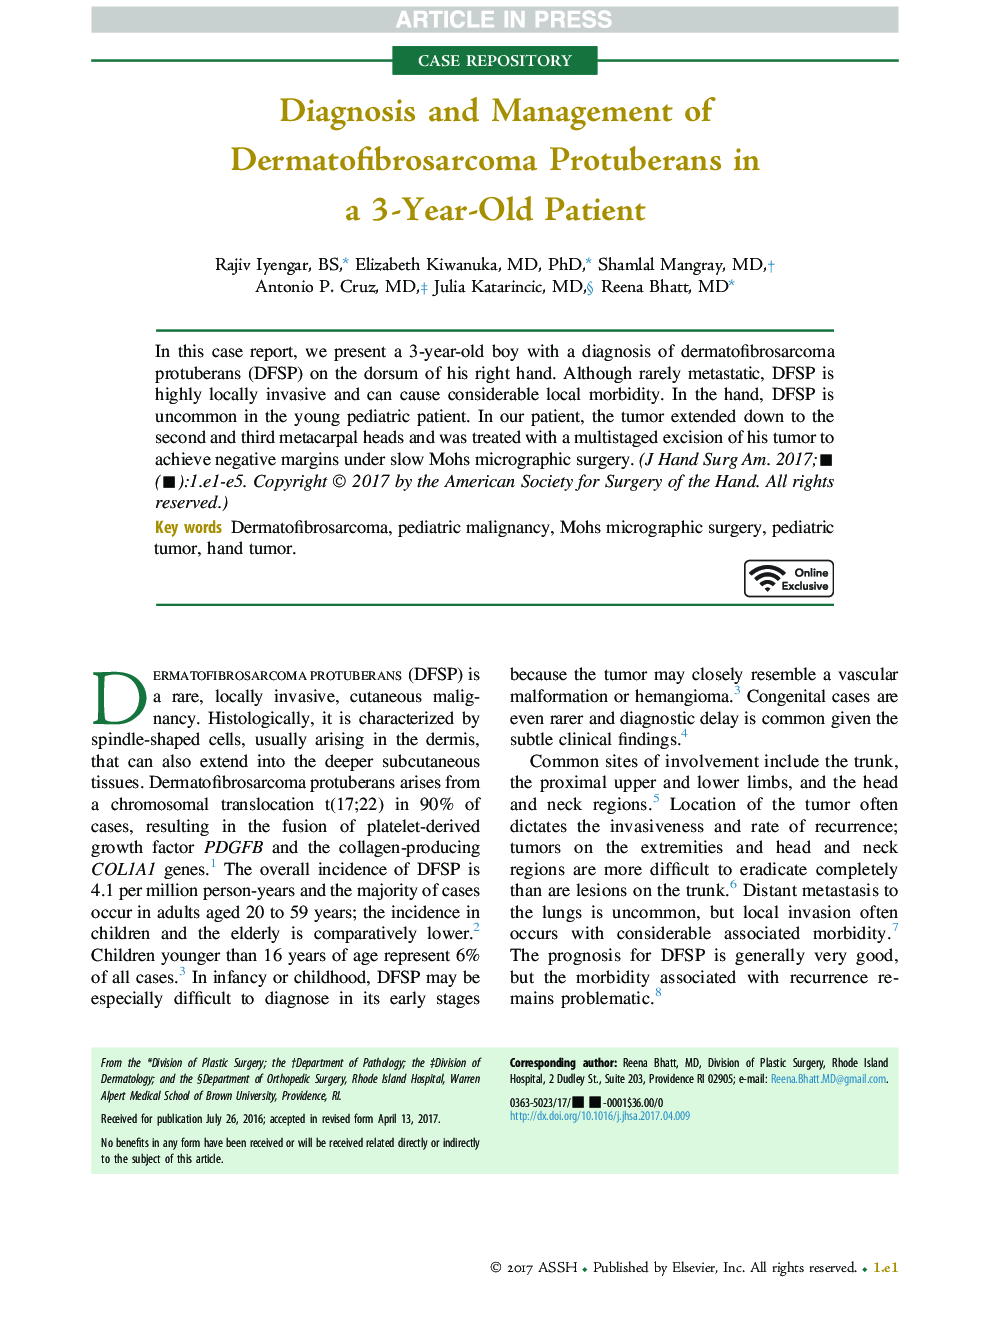 Diagnosis and Management of Dermatofibrosarcoma Protuberans in aÂ 3-Year-Old Patient